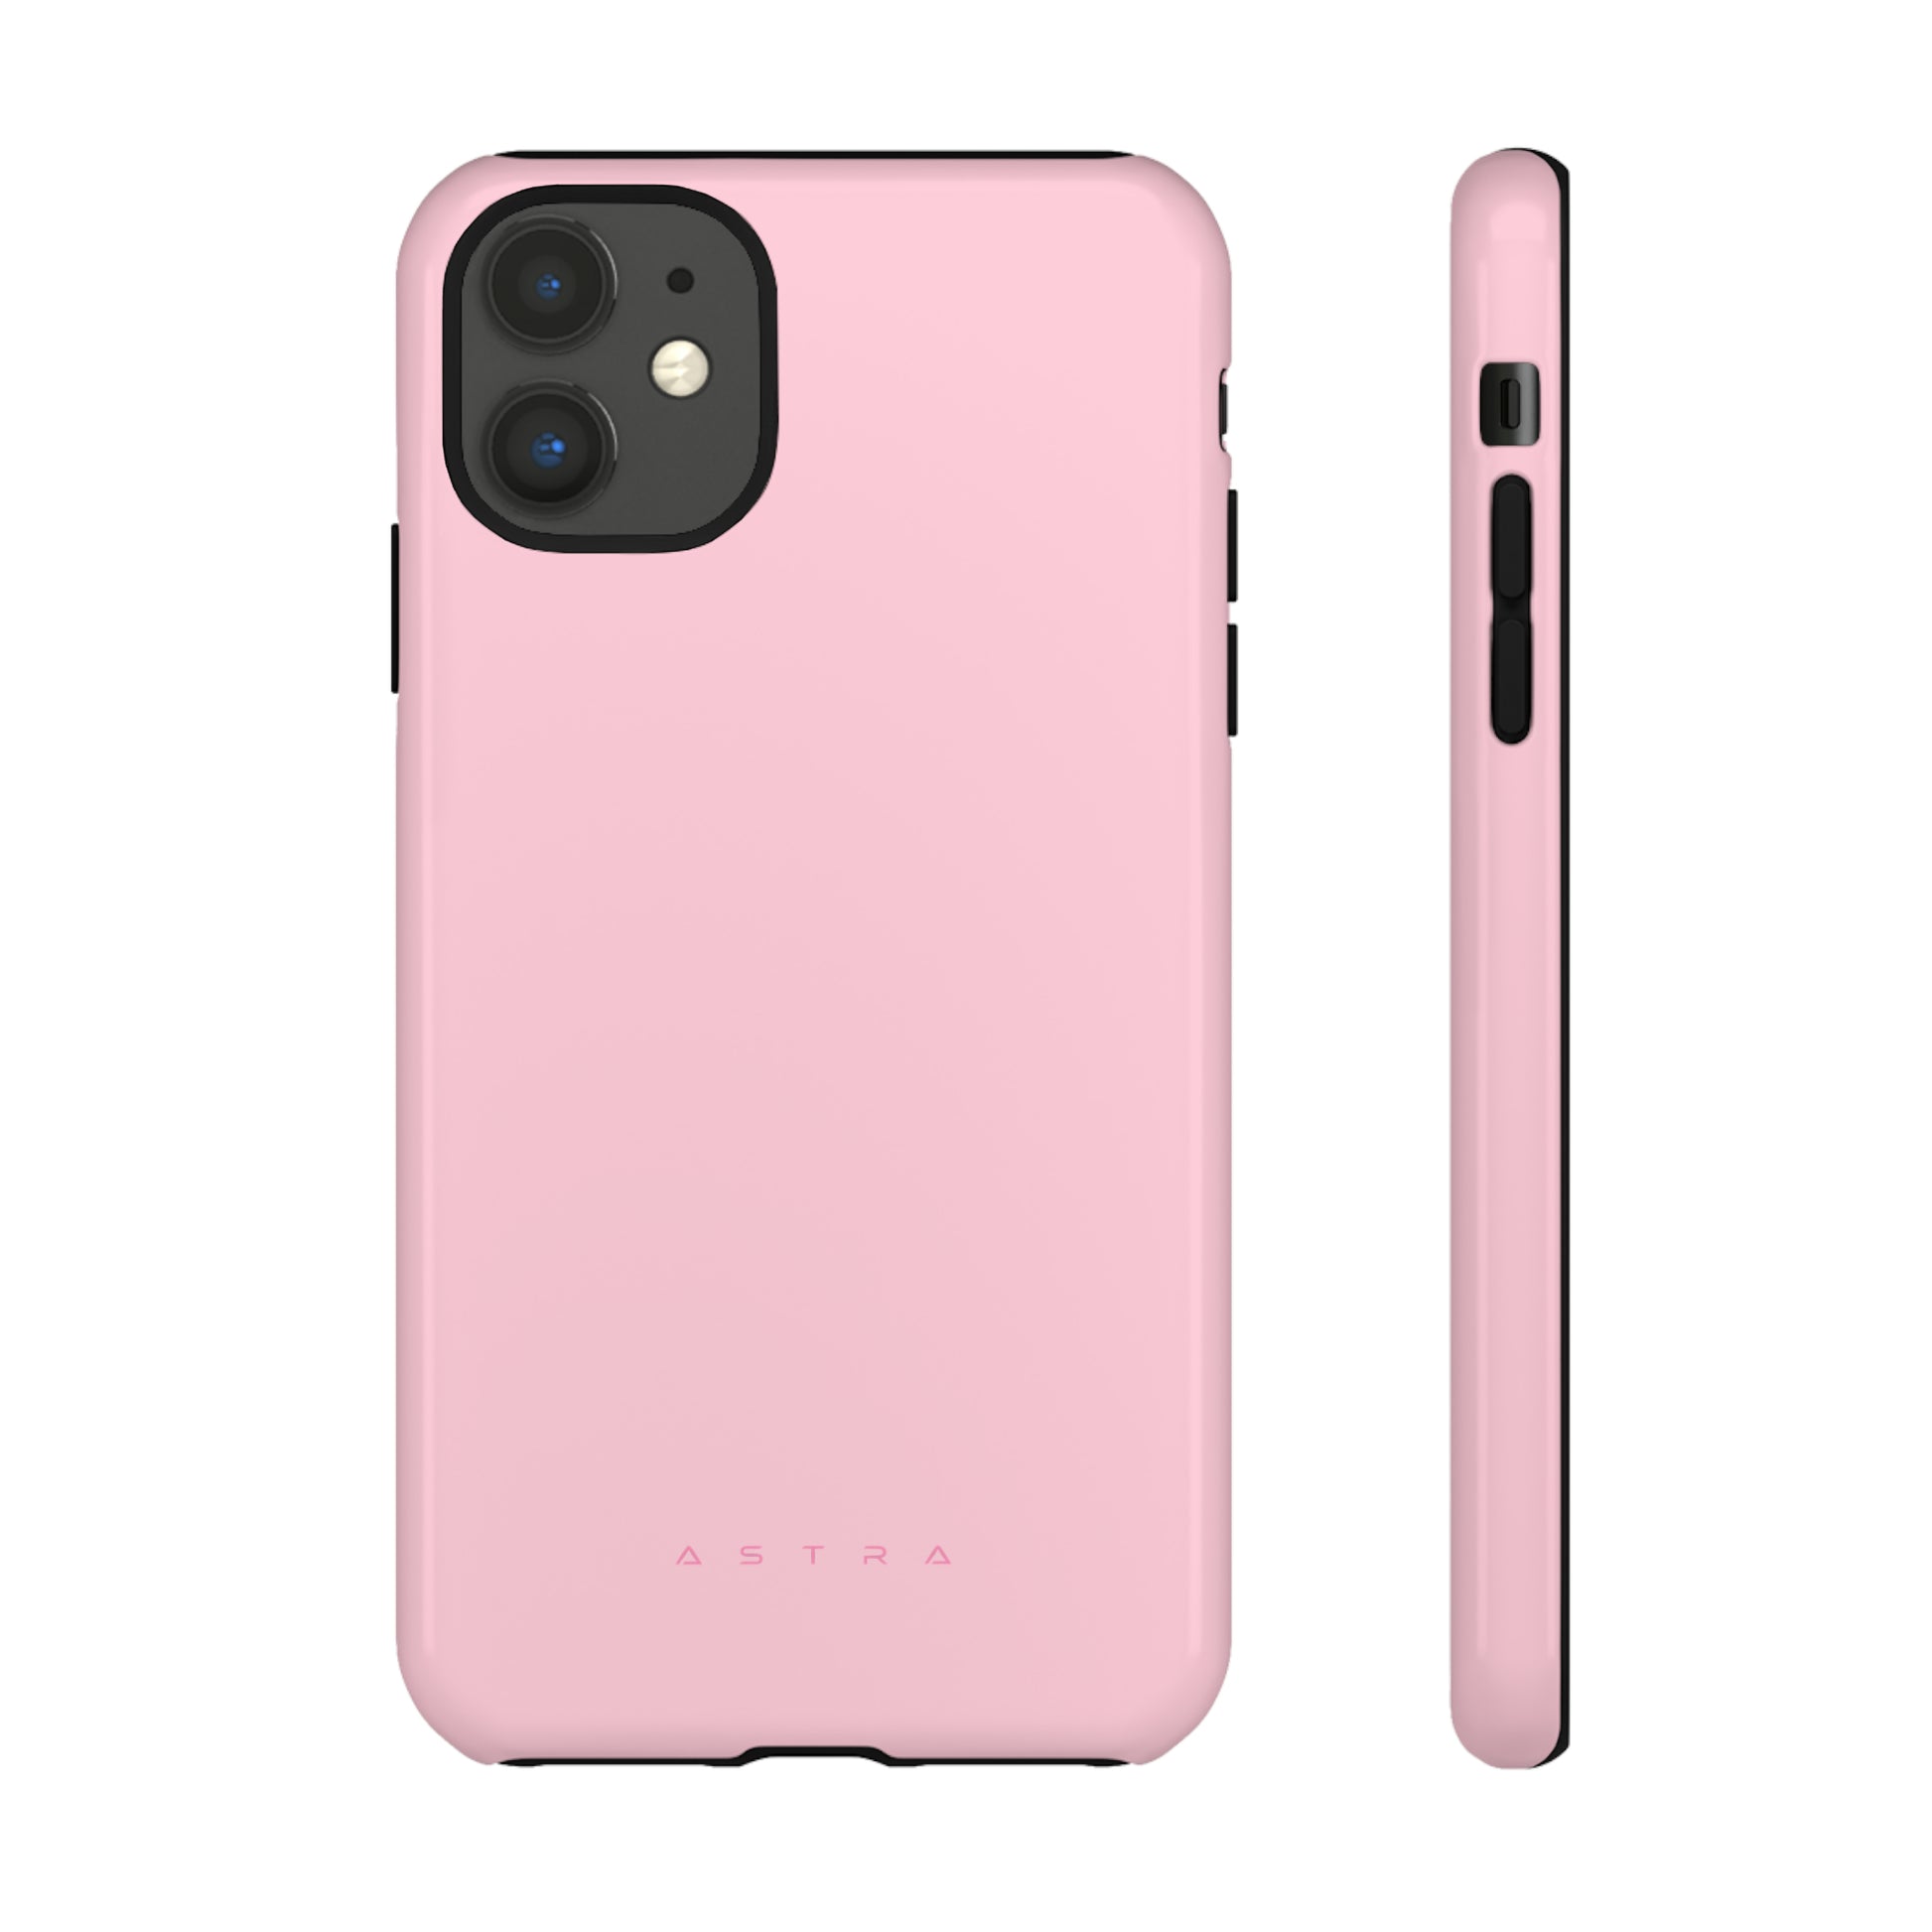 The Original iPhone 11 Glossy Phone Case Accessories Elite Glossy iPhone Cases Matte mobi Phone accessory Phone Cases Samsung Cases Valentine's Day Picks